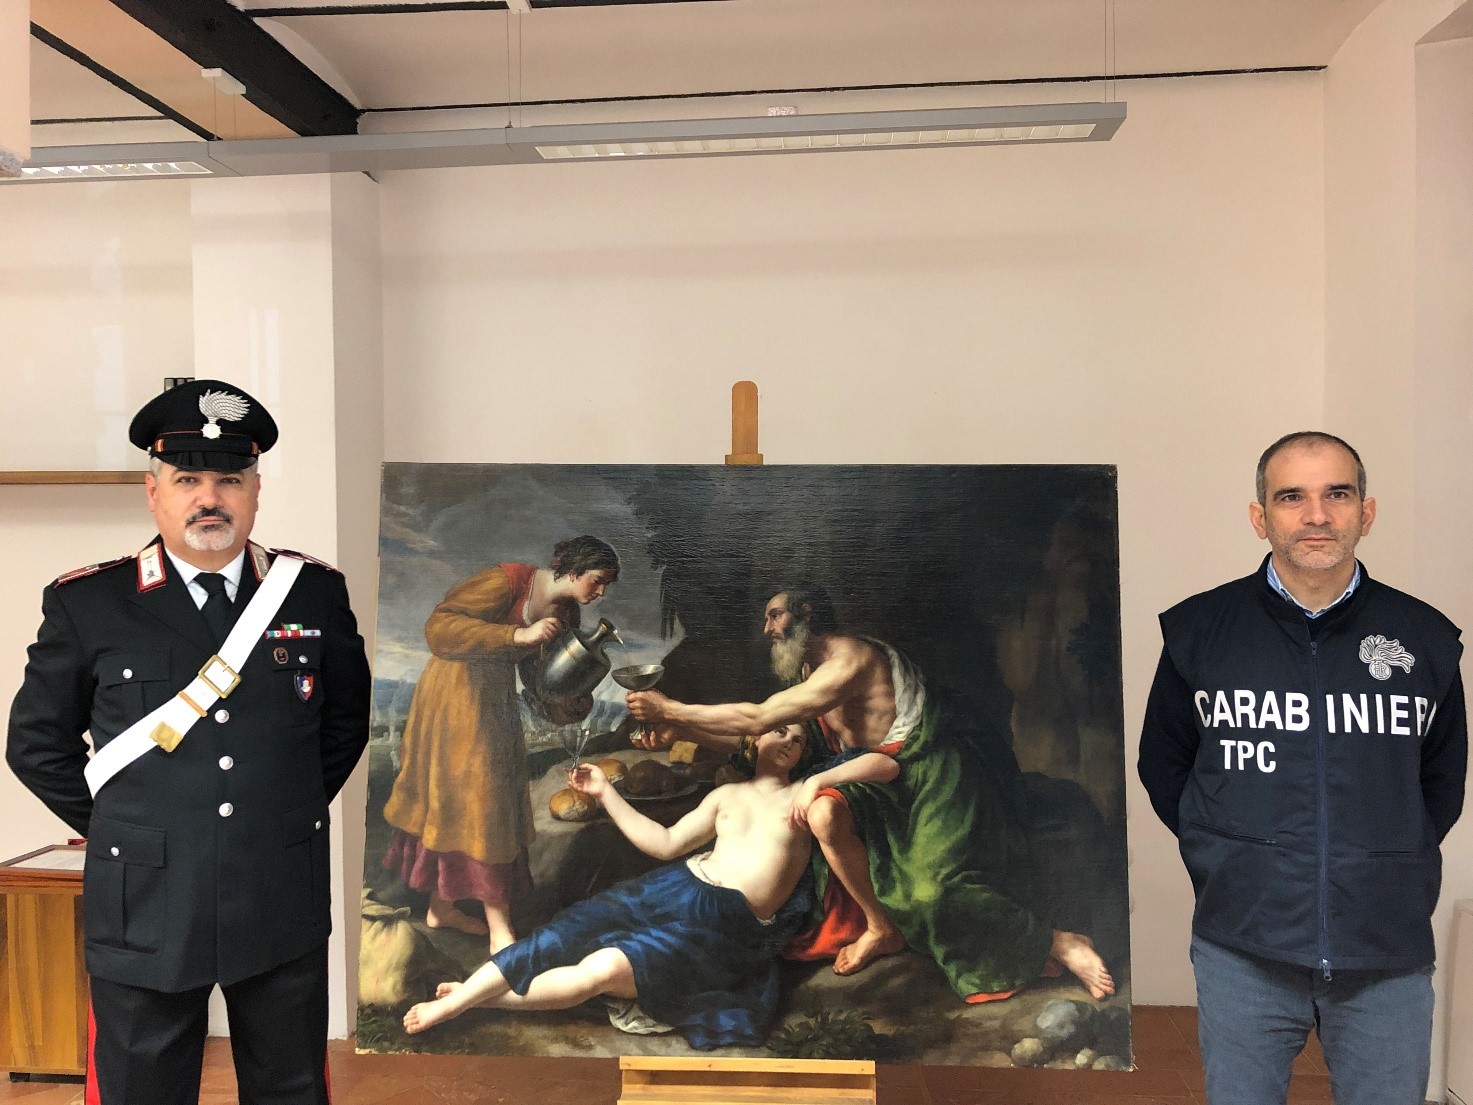 The recovered painting